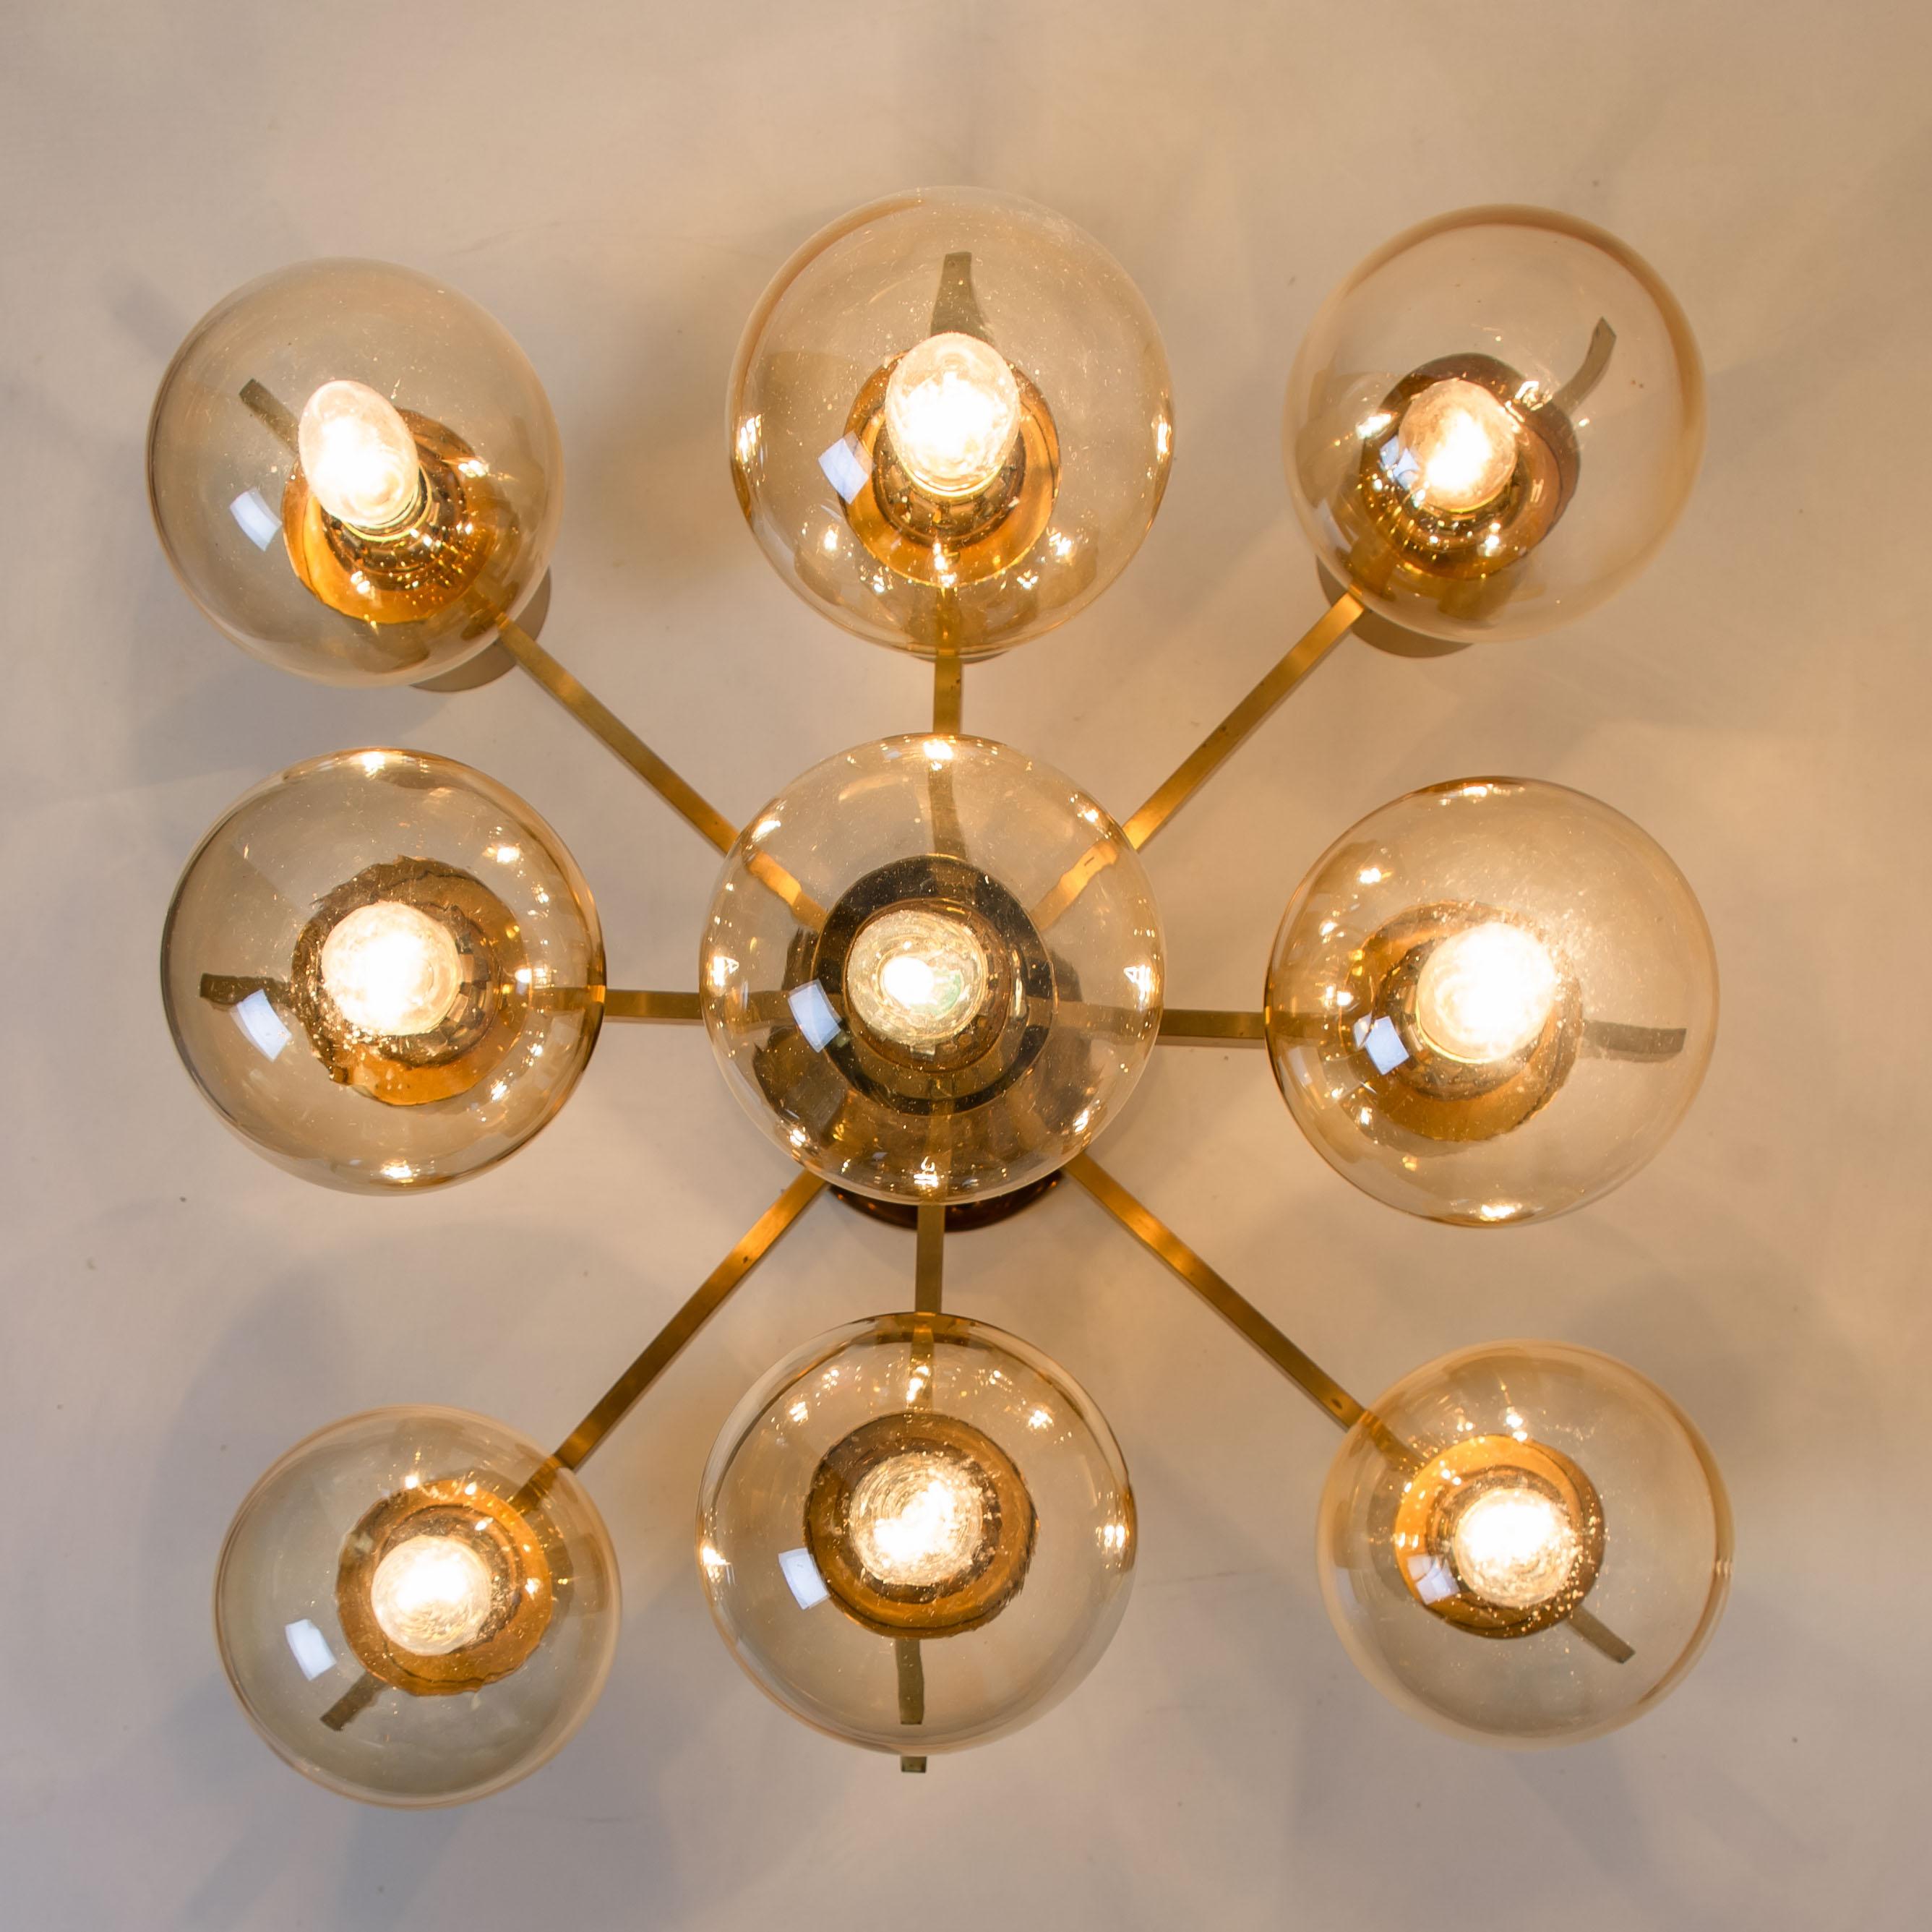 Set of Three Brass and Glass Light Fixtures in the Style of Jakobsson, 1960s For Sale 2